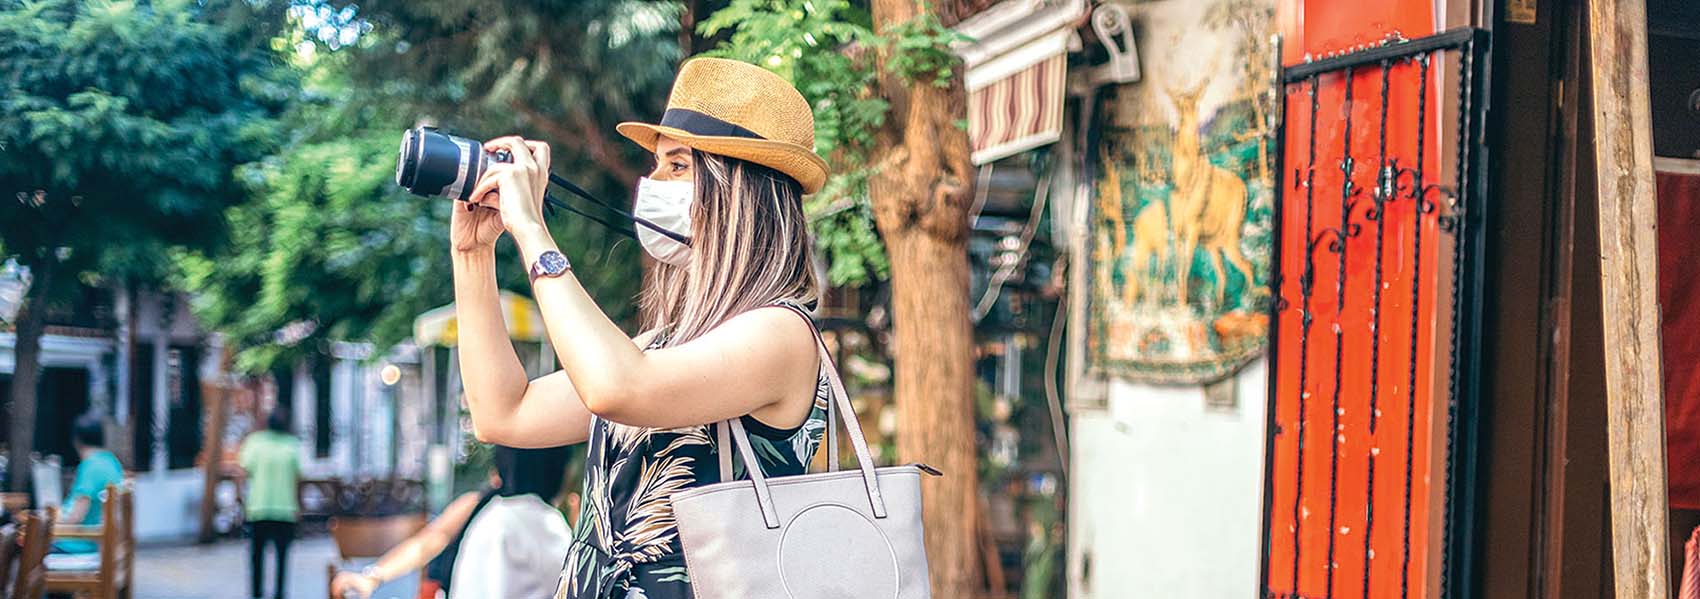 a masked tourist snaps photos in Italy